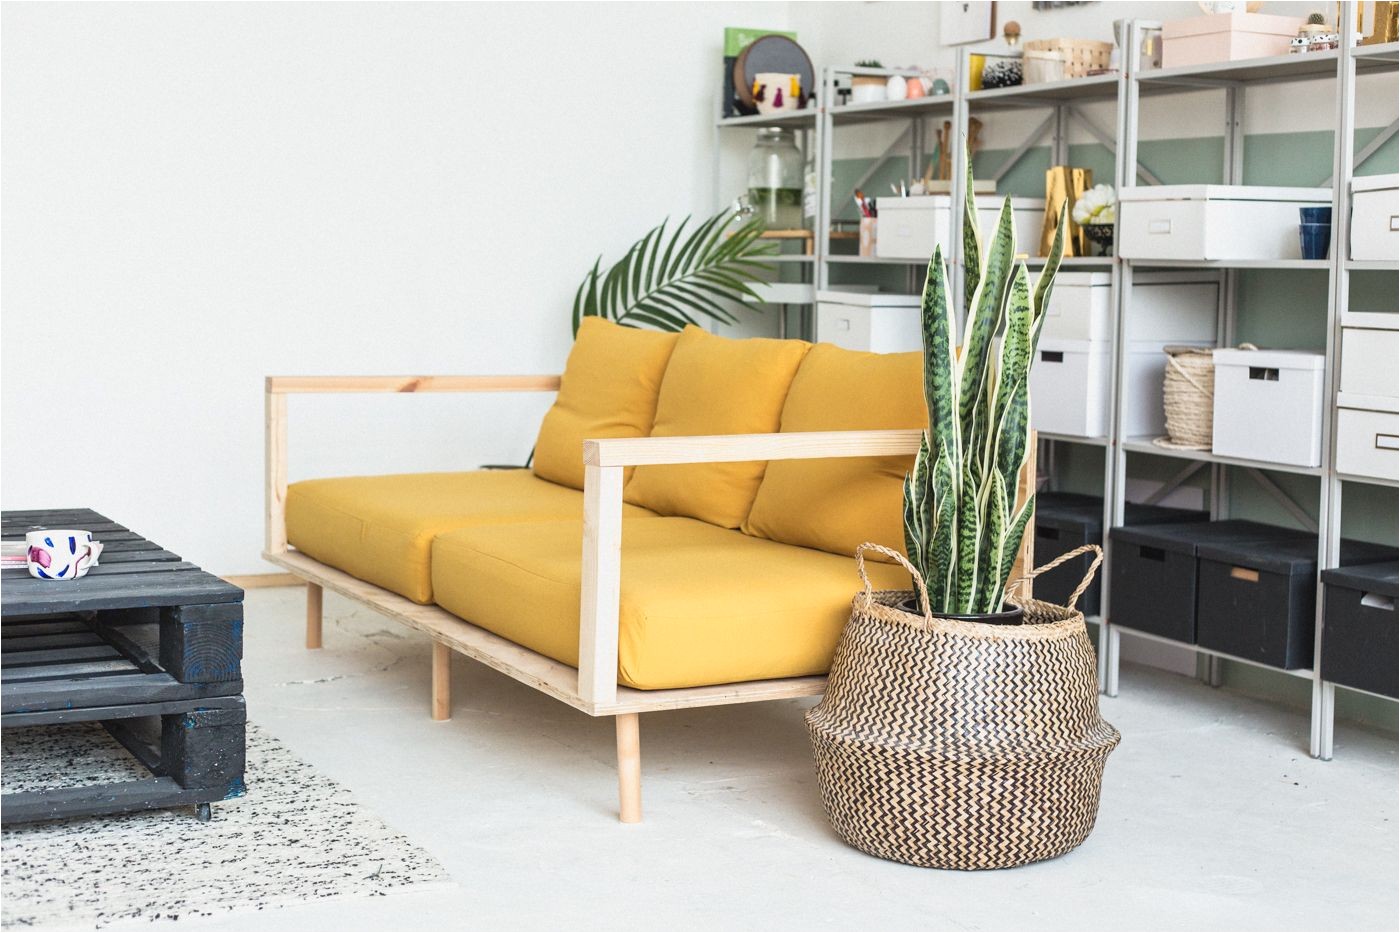 make yourself comfortable with this easy diy wooden studio sofa